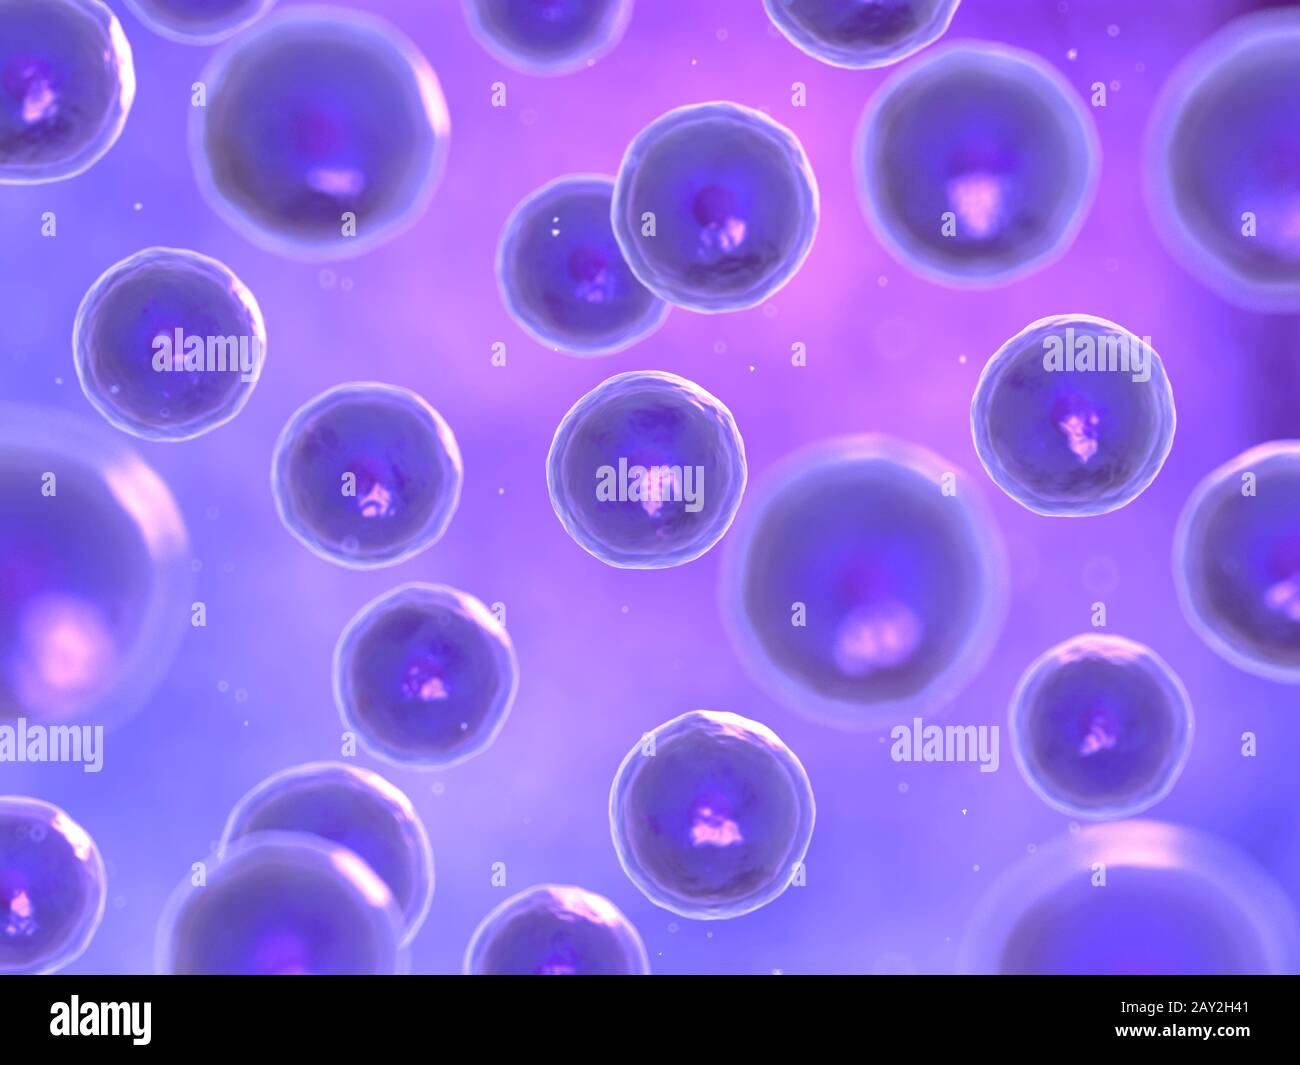 conceptual illustration of some cells Stock Photo